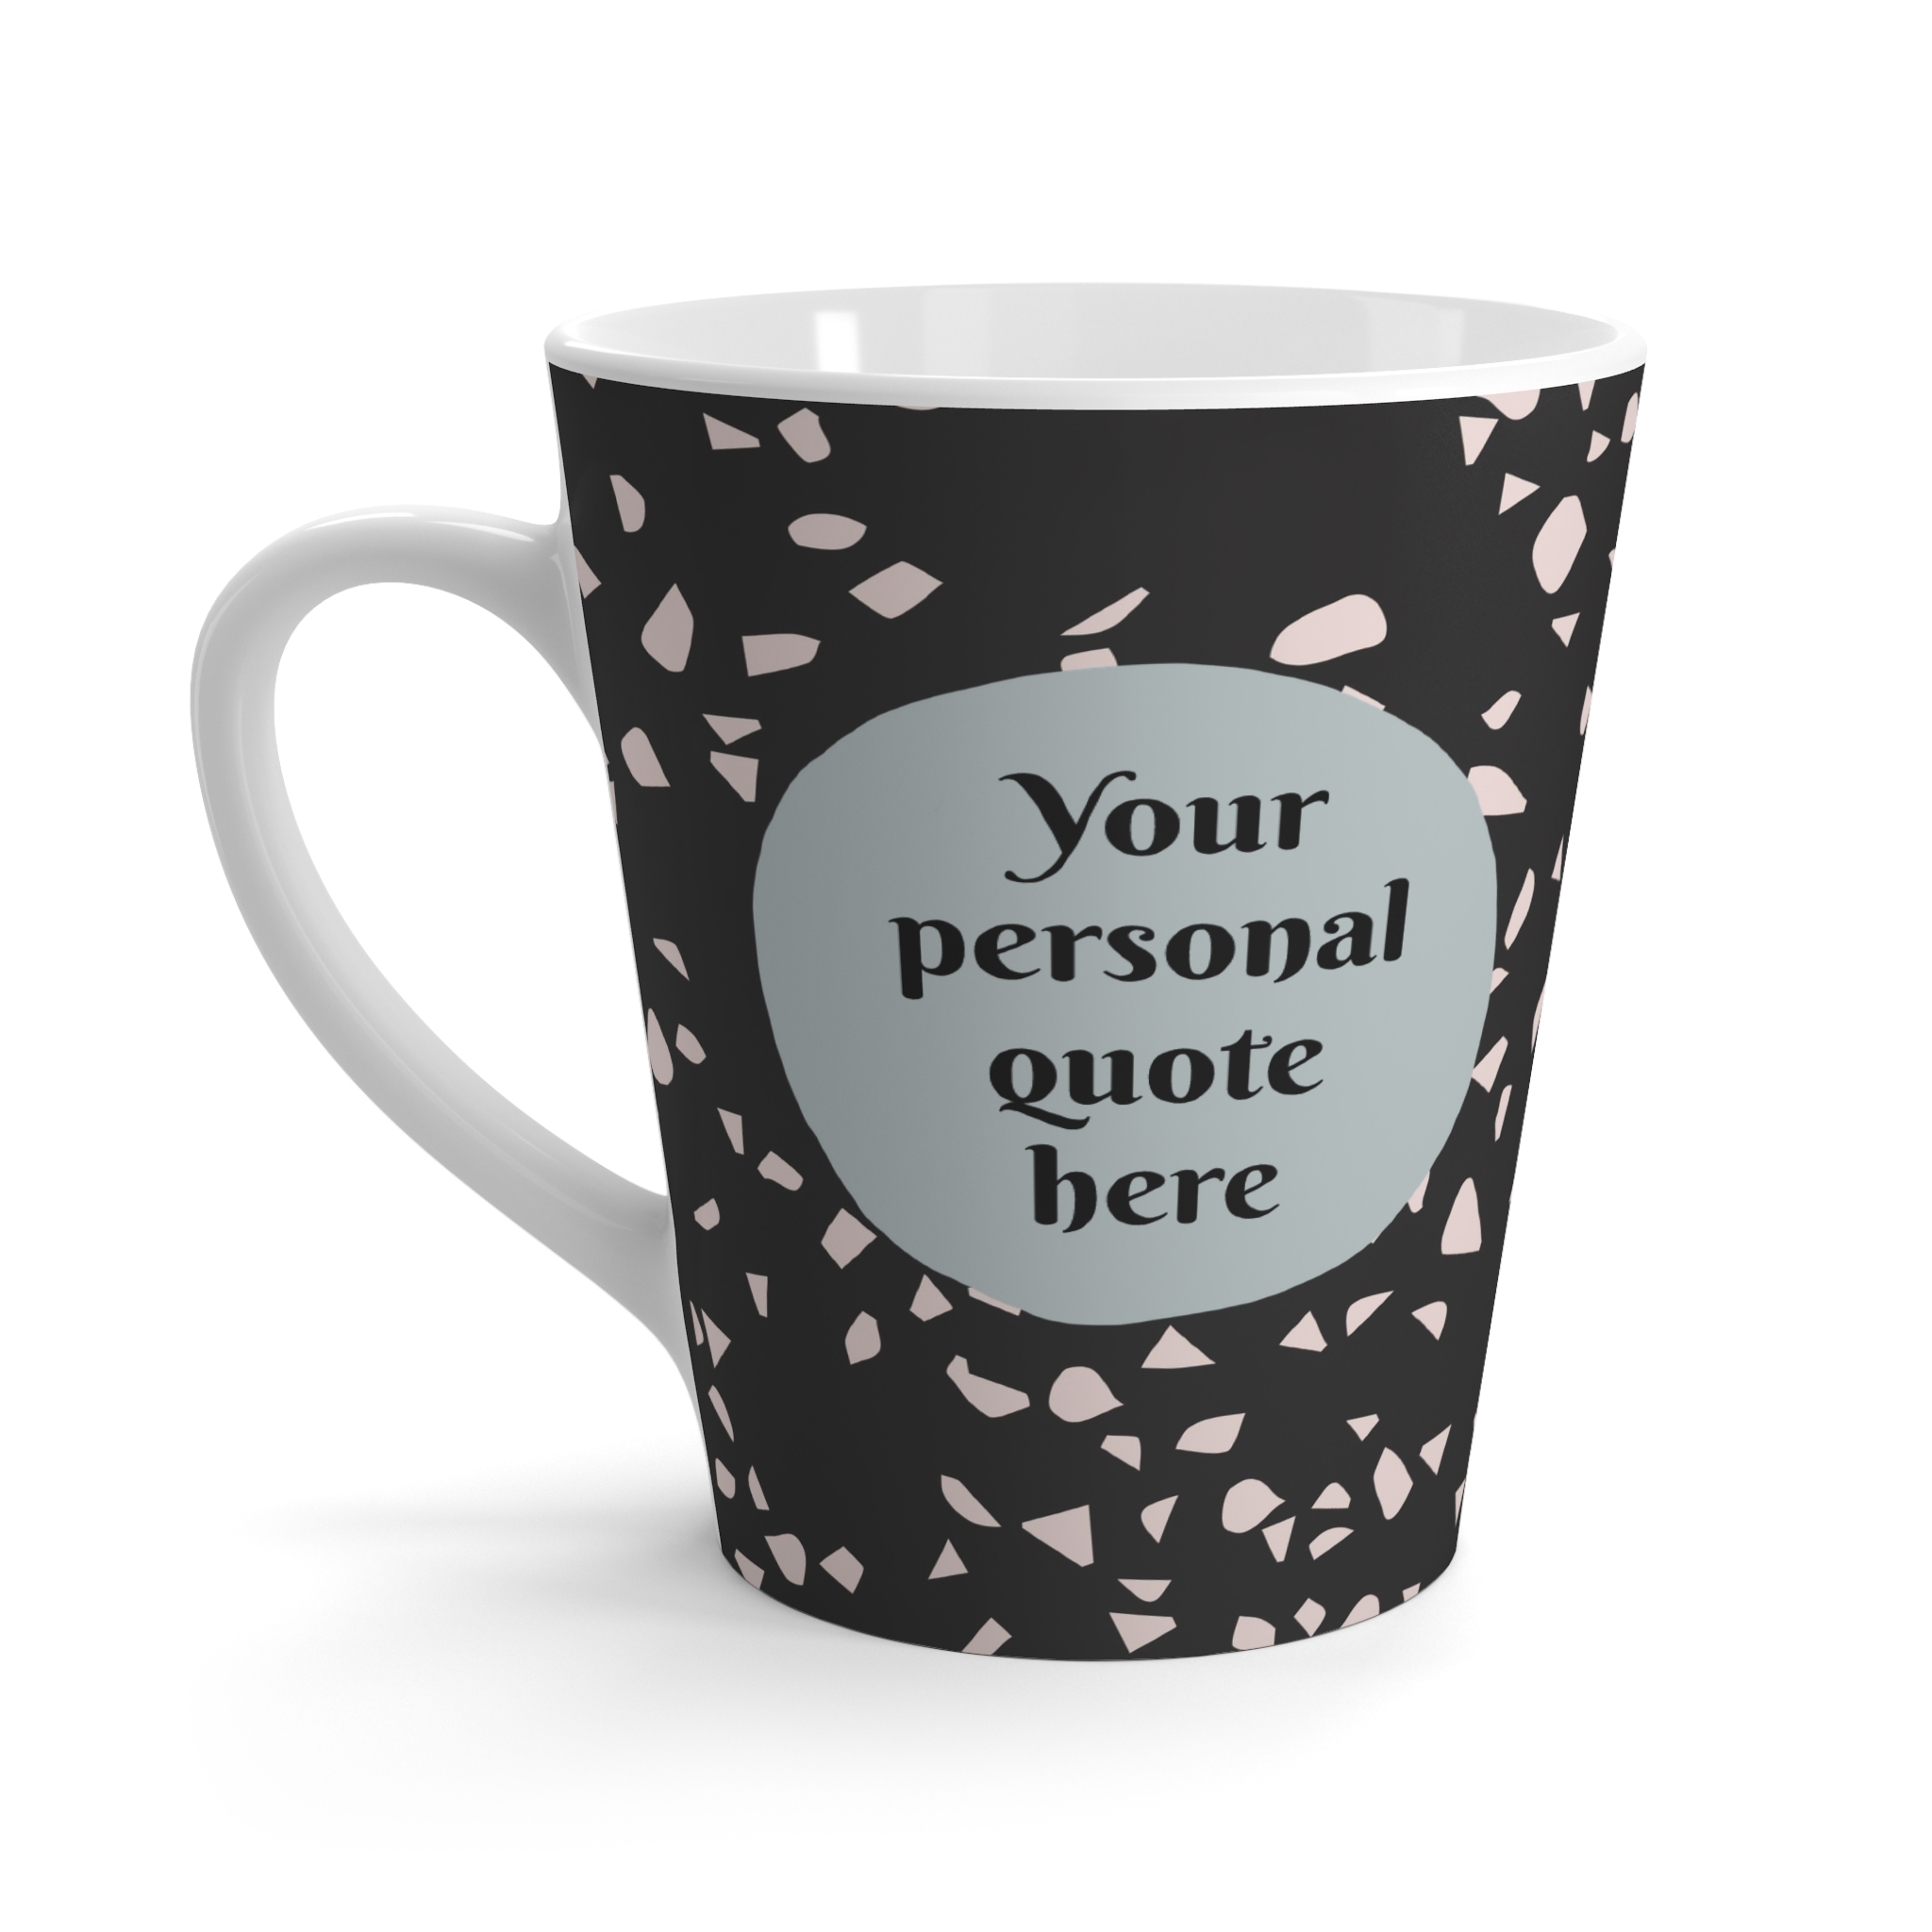 black and white terrazzo mug with custom quote with portrait of the wedding couple as keep sake or anniversary gift